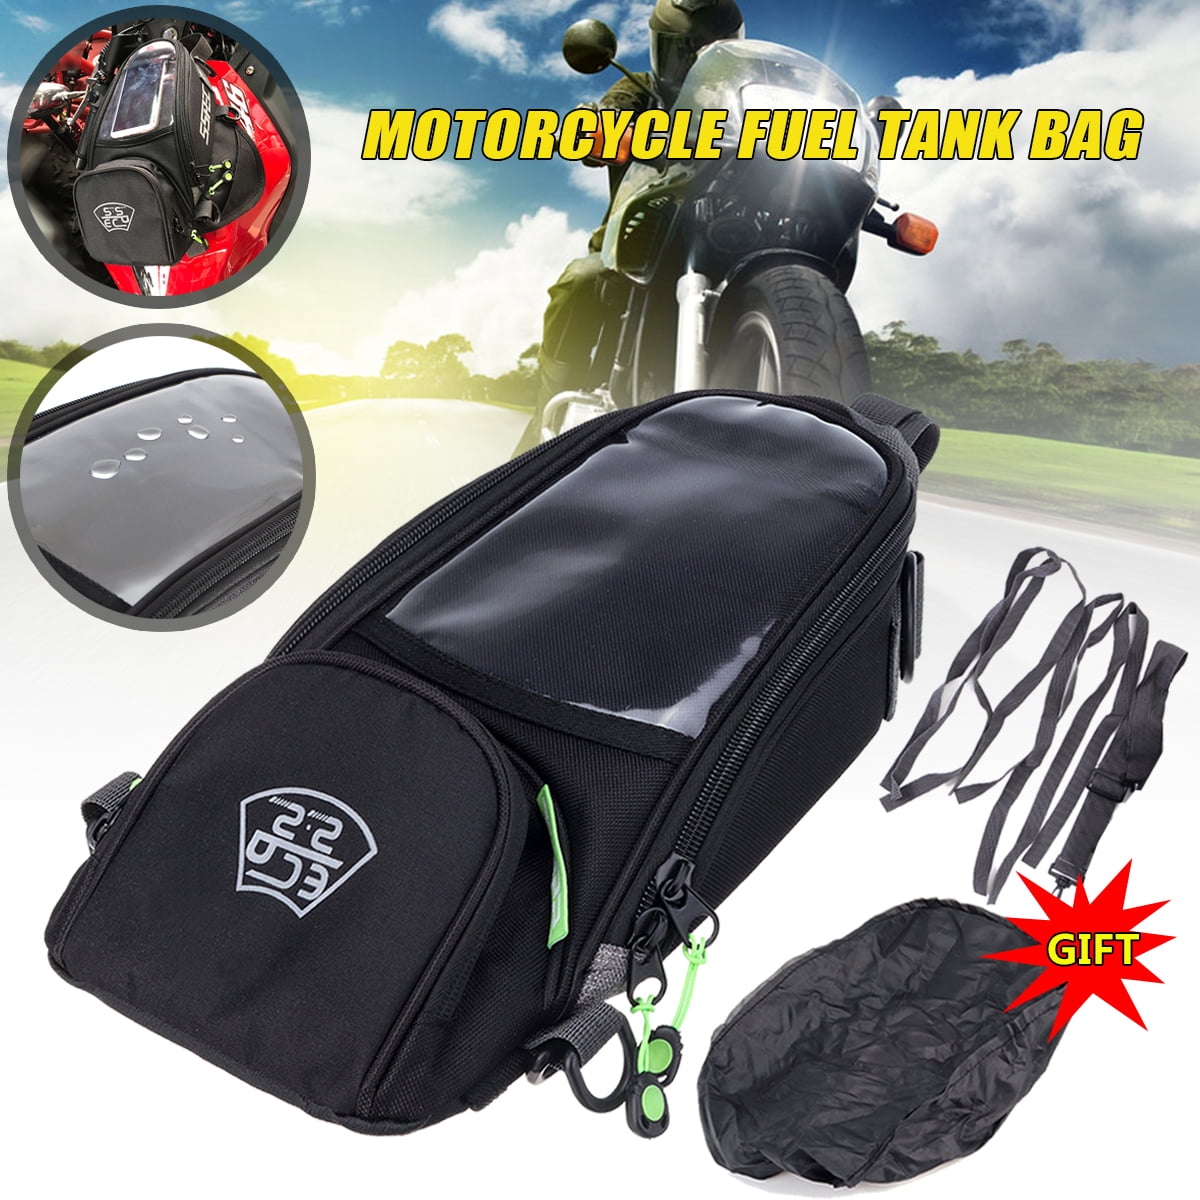 TARTIERY Motorcycle Tank Bag,Universal Magnetic Tank Bag Phone Pouch Touch Screen Motorbike Fuel Tank Transparent Bag Mobile Phone Seat Bag Oil Bag Cell Phone Phone Holder Pouch